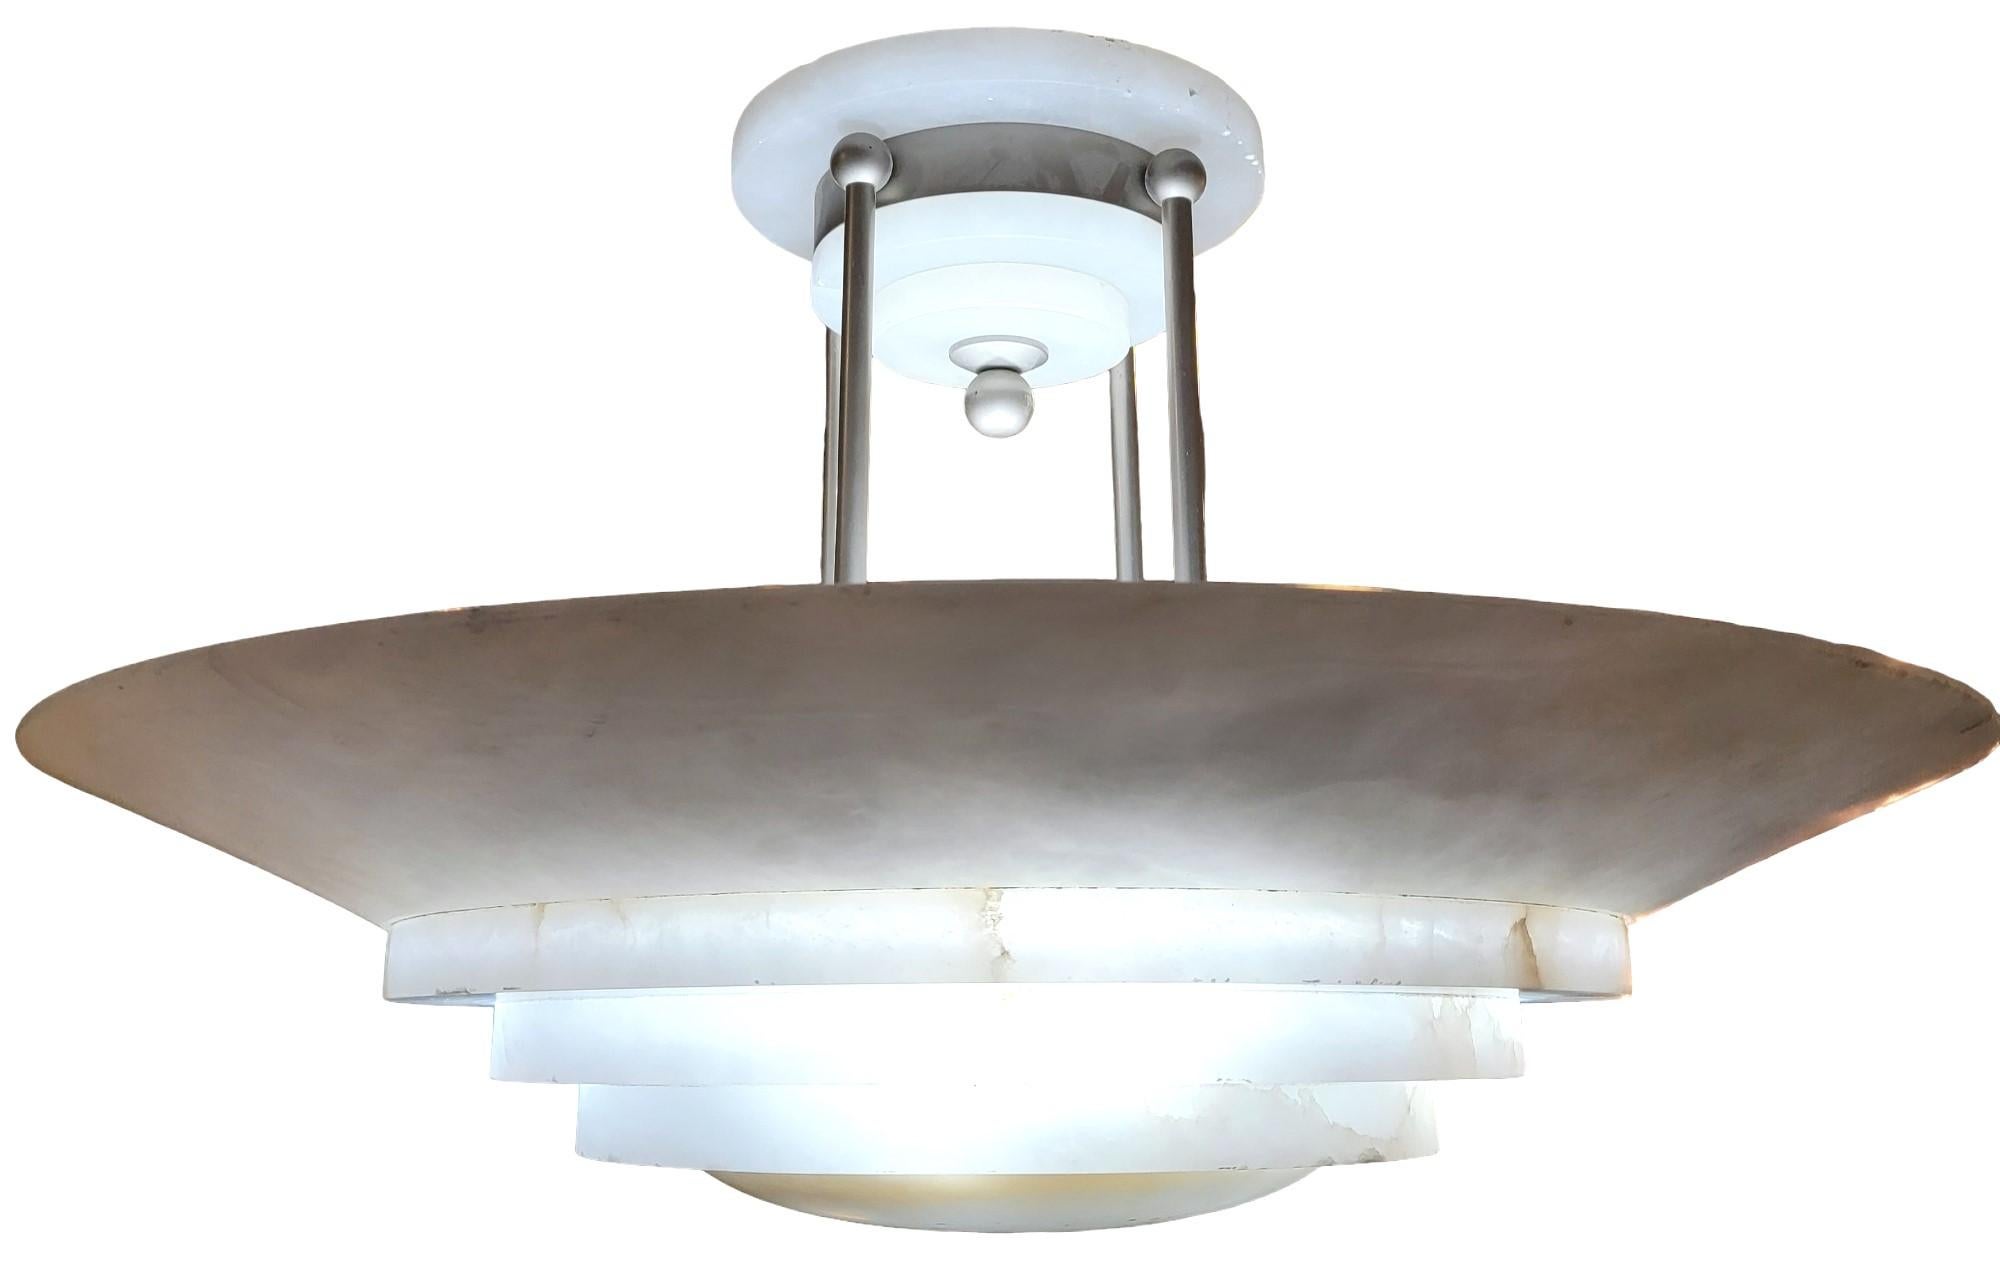 1970s Onyx Chandelier. Wonderful translucent White layers with minor variations in color. Minor wear from age and use.
